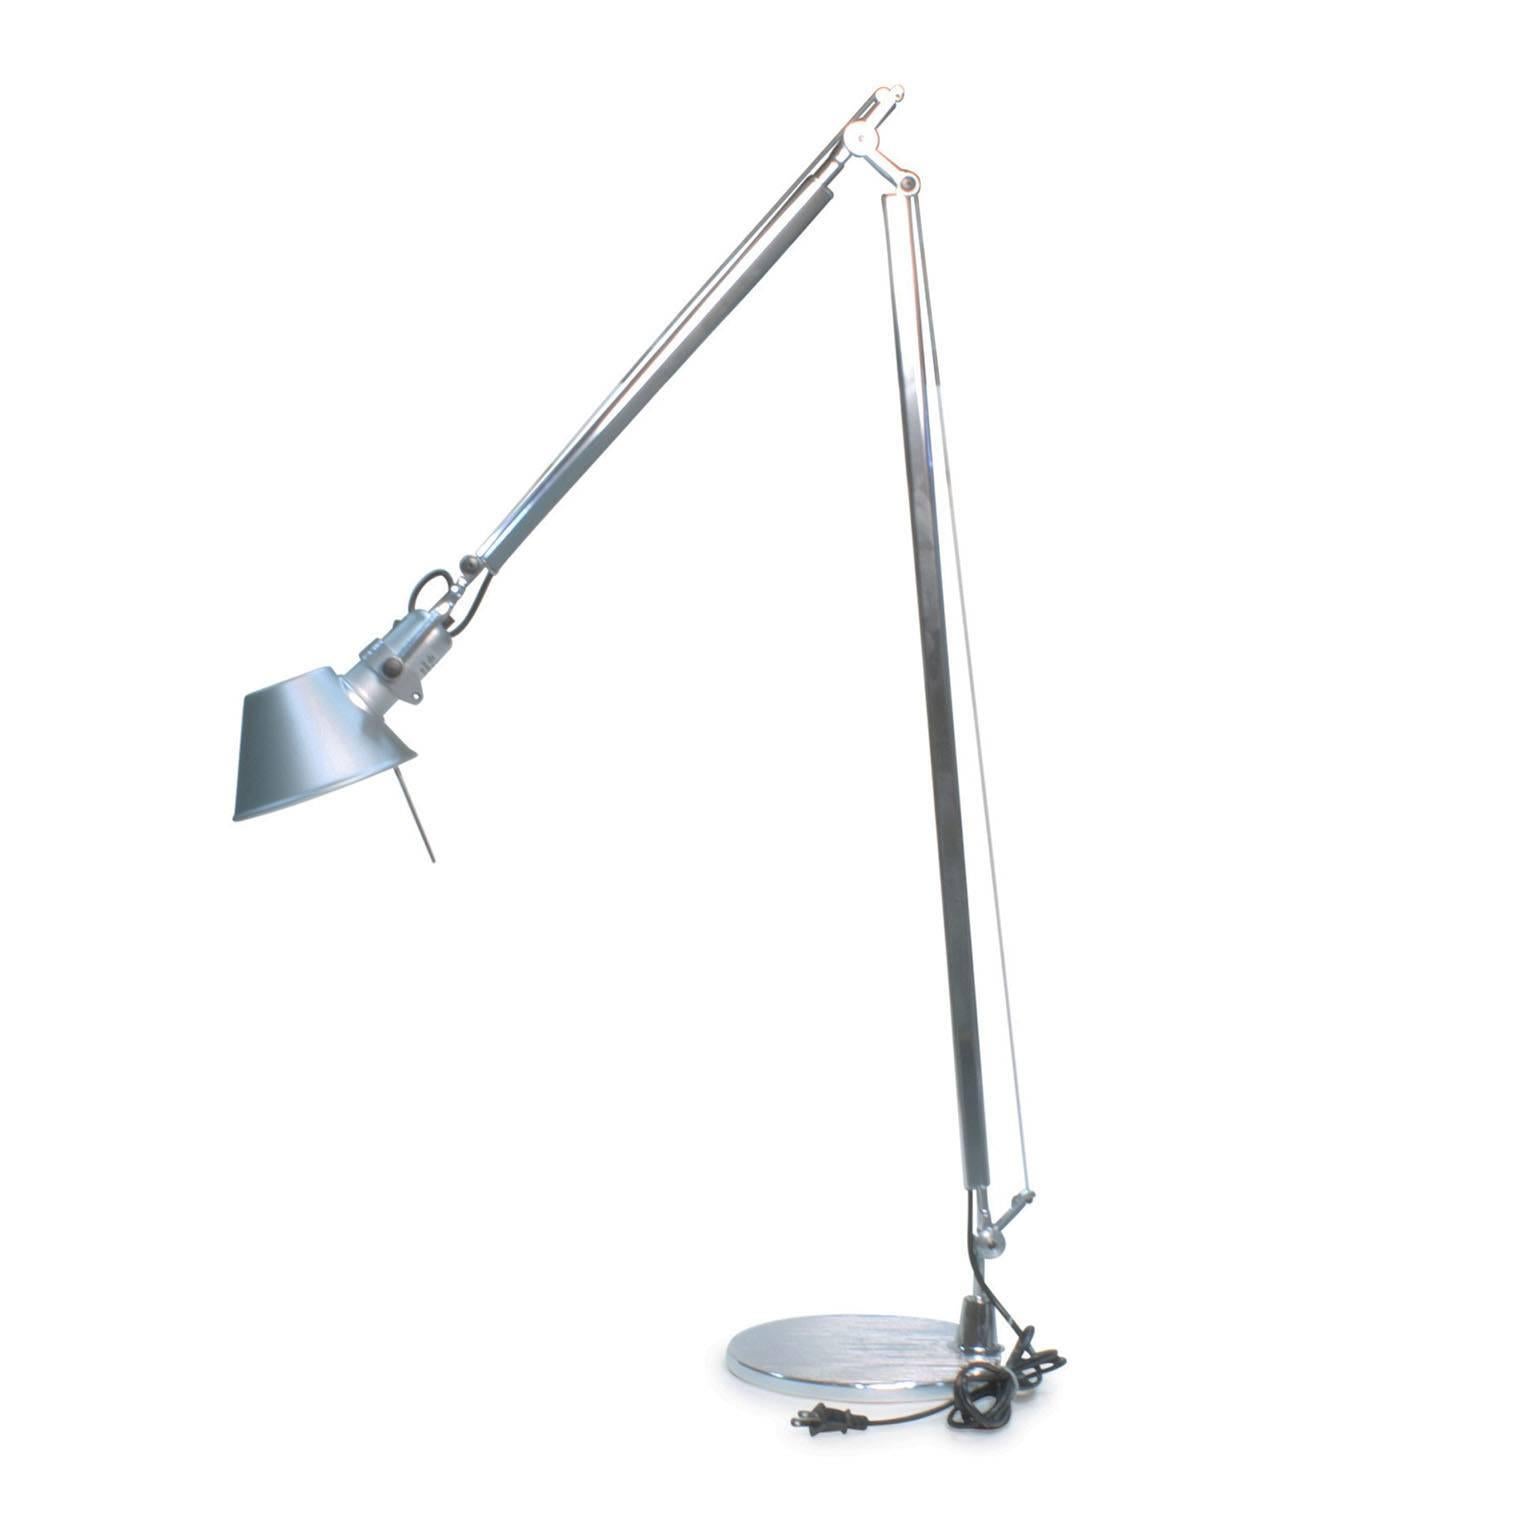 Michele De Lucchi's design work spans many disciplines from lighting, architecture, Industrial Design, to lap tops. Of all his designs, the Tolomeo stands as one of his greatest designs. In 1989 it was awarded the Compasso d'Oro for its achievements